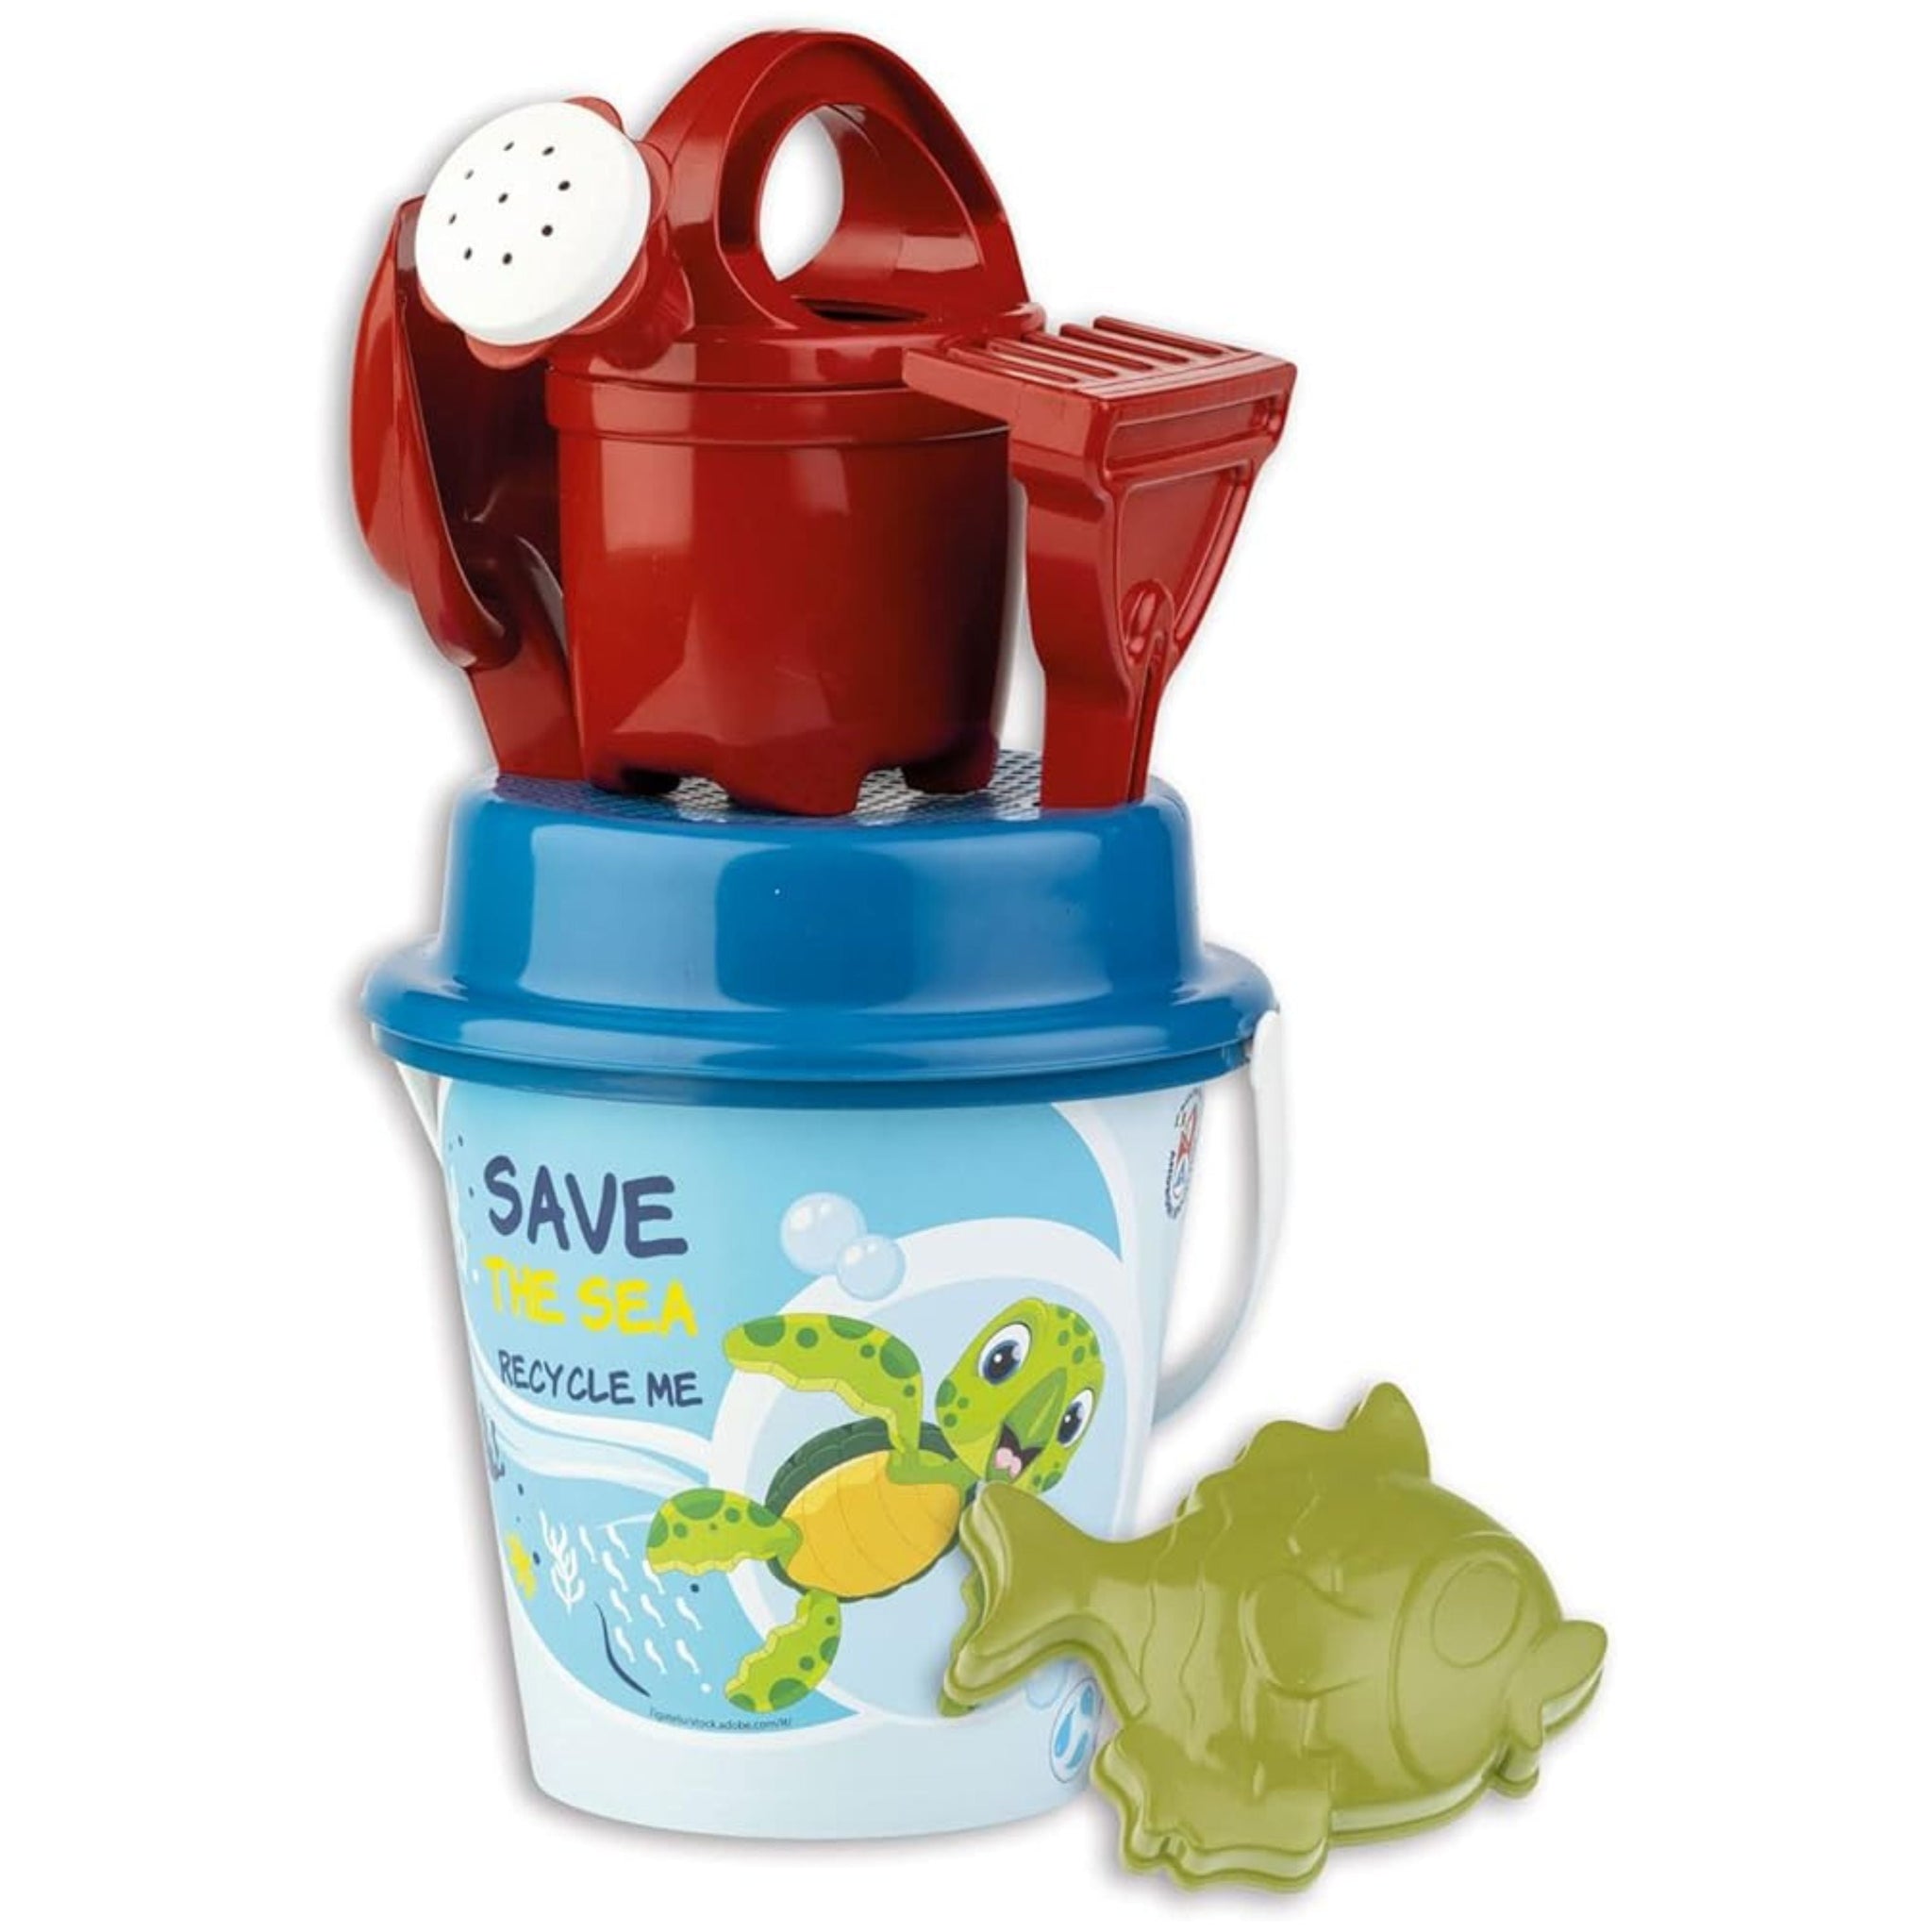 Recycled - Save the Forest & Save the Sea Bucket Set 2 Assorted: Panda / Turtle